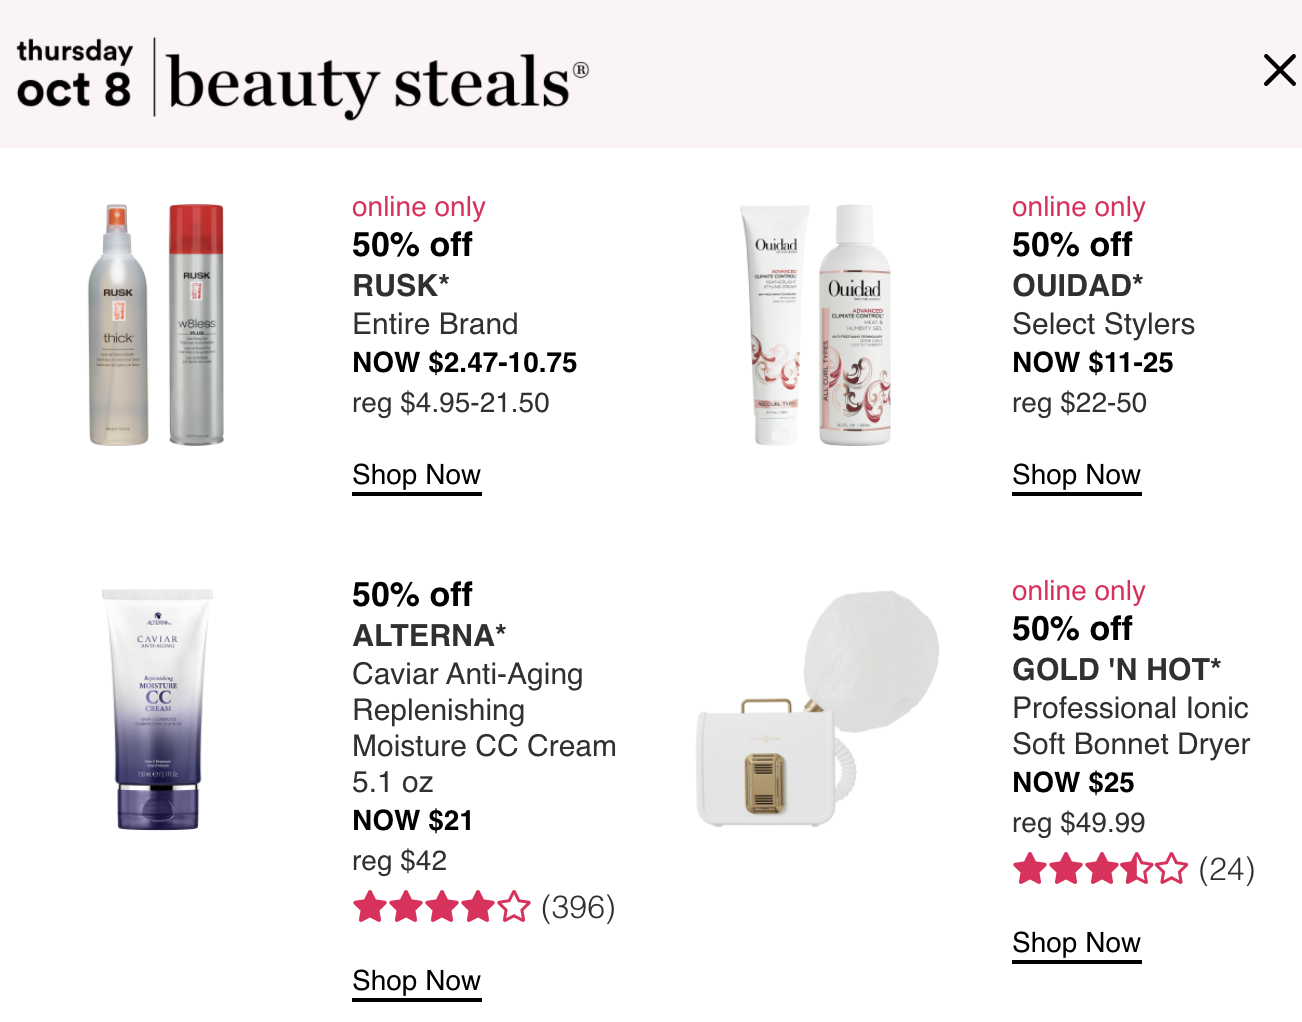 Ulta: Gorgeous Hair Event - Day 5(tomorrow) - Gift With Purchase